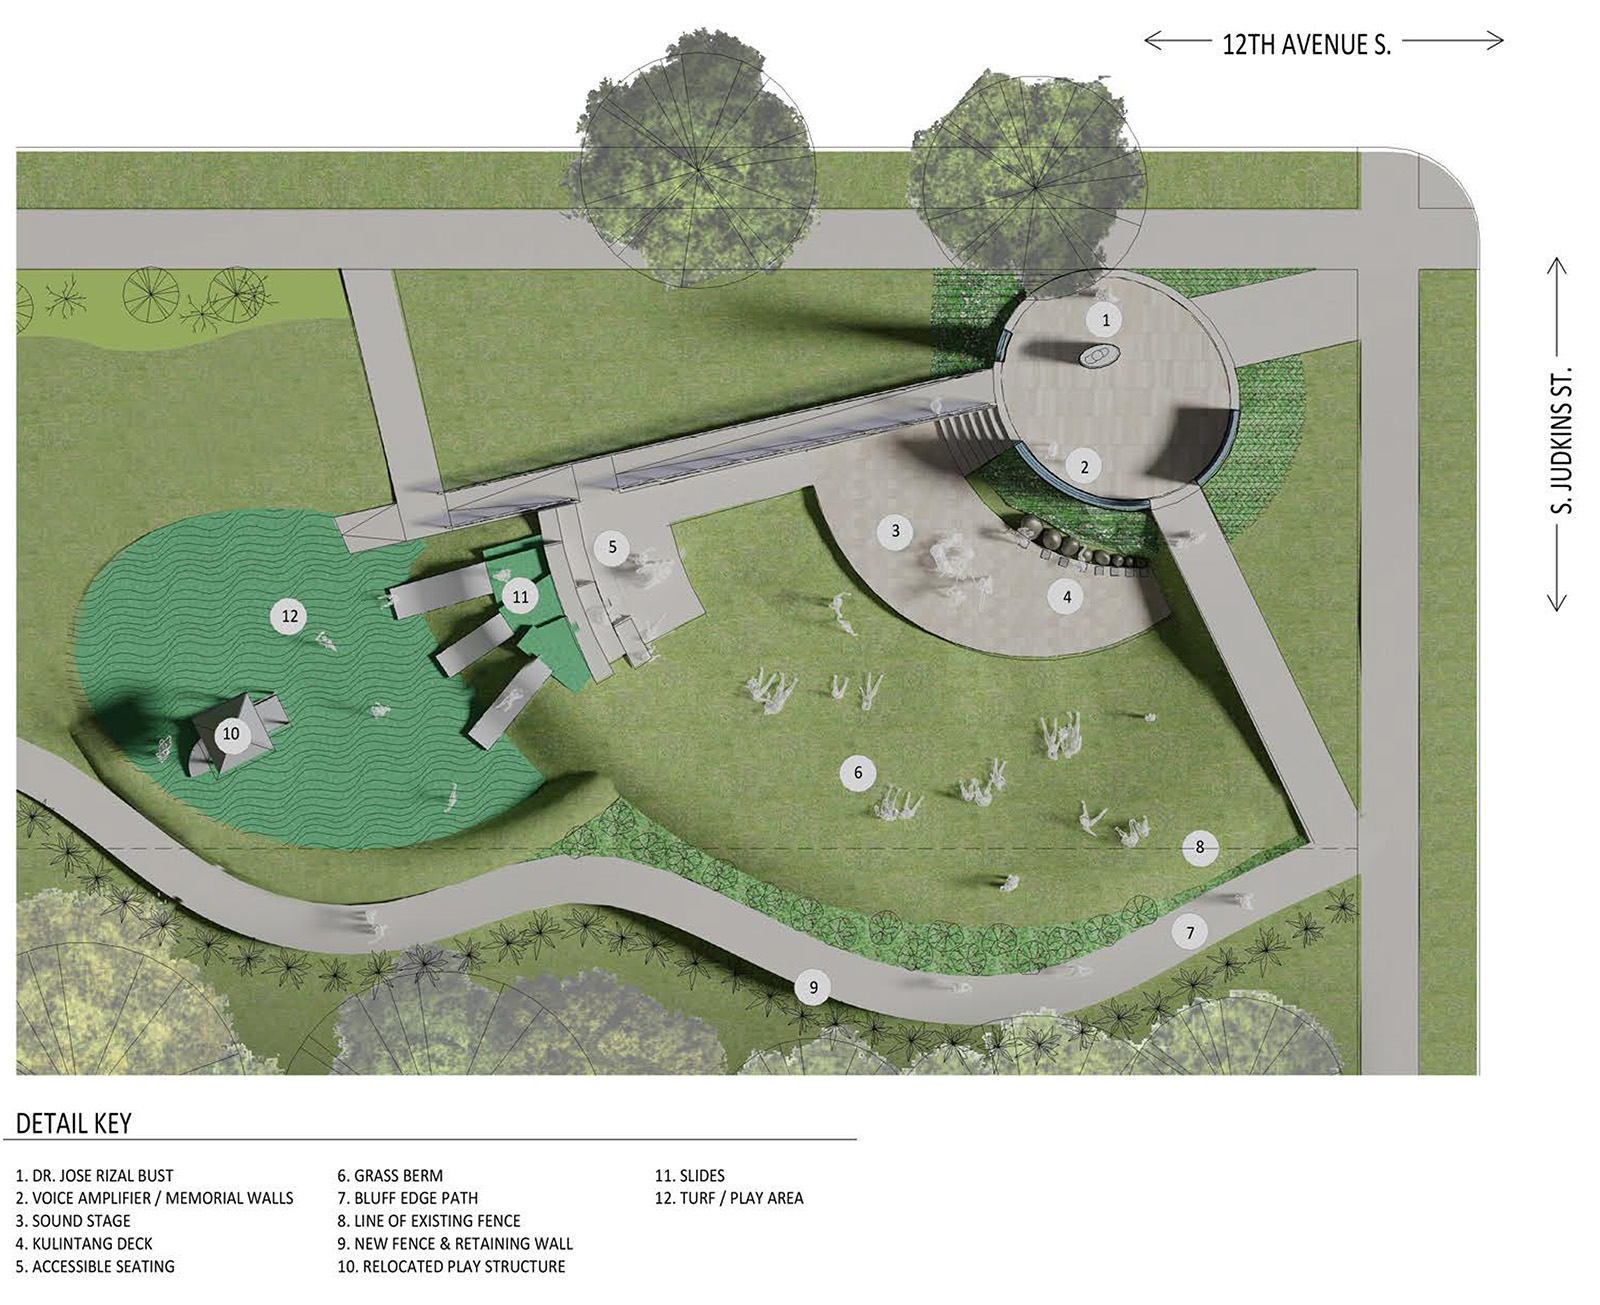 Plan view of the Jose Rizal Park proposed design